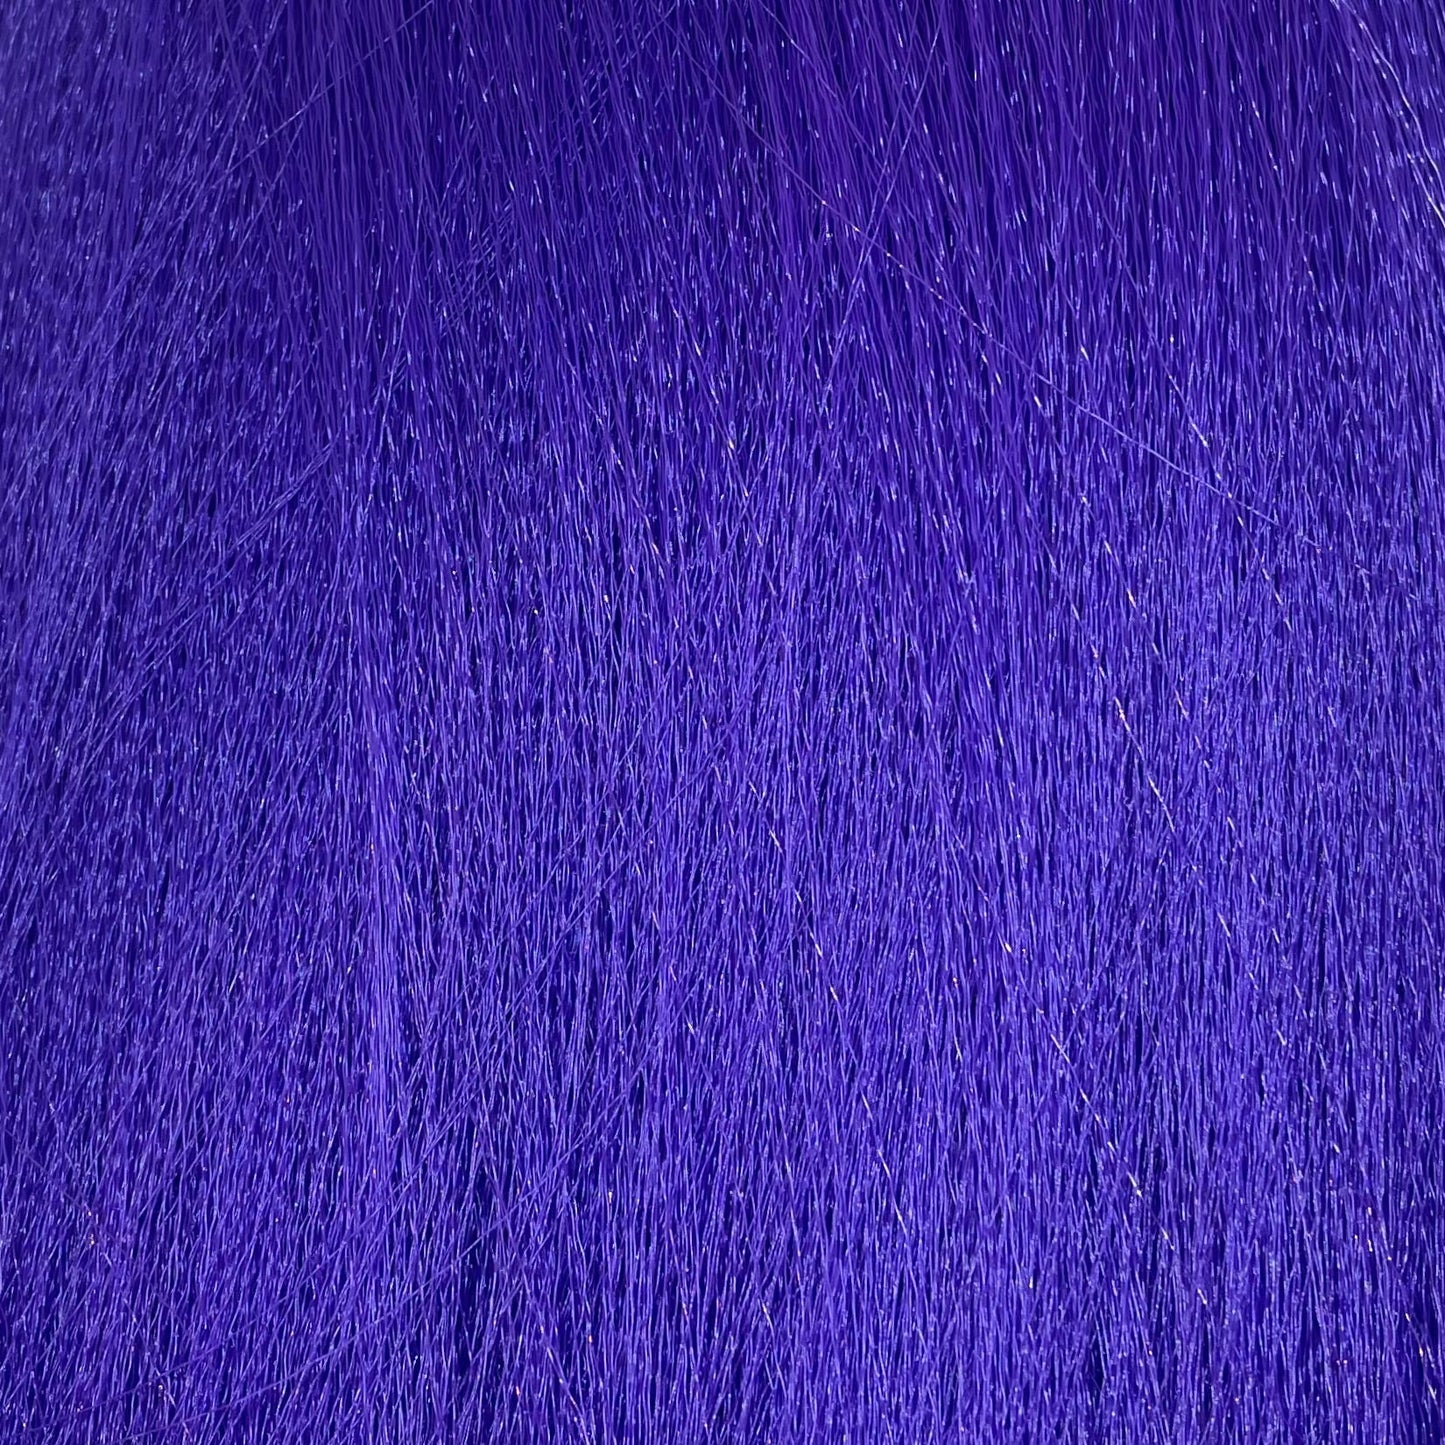 8" CRIMPED NYLON TAIL MATERIAL